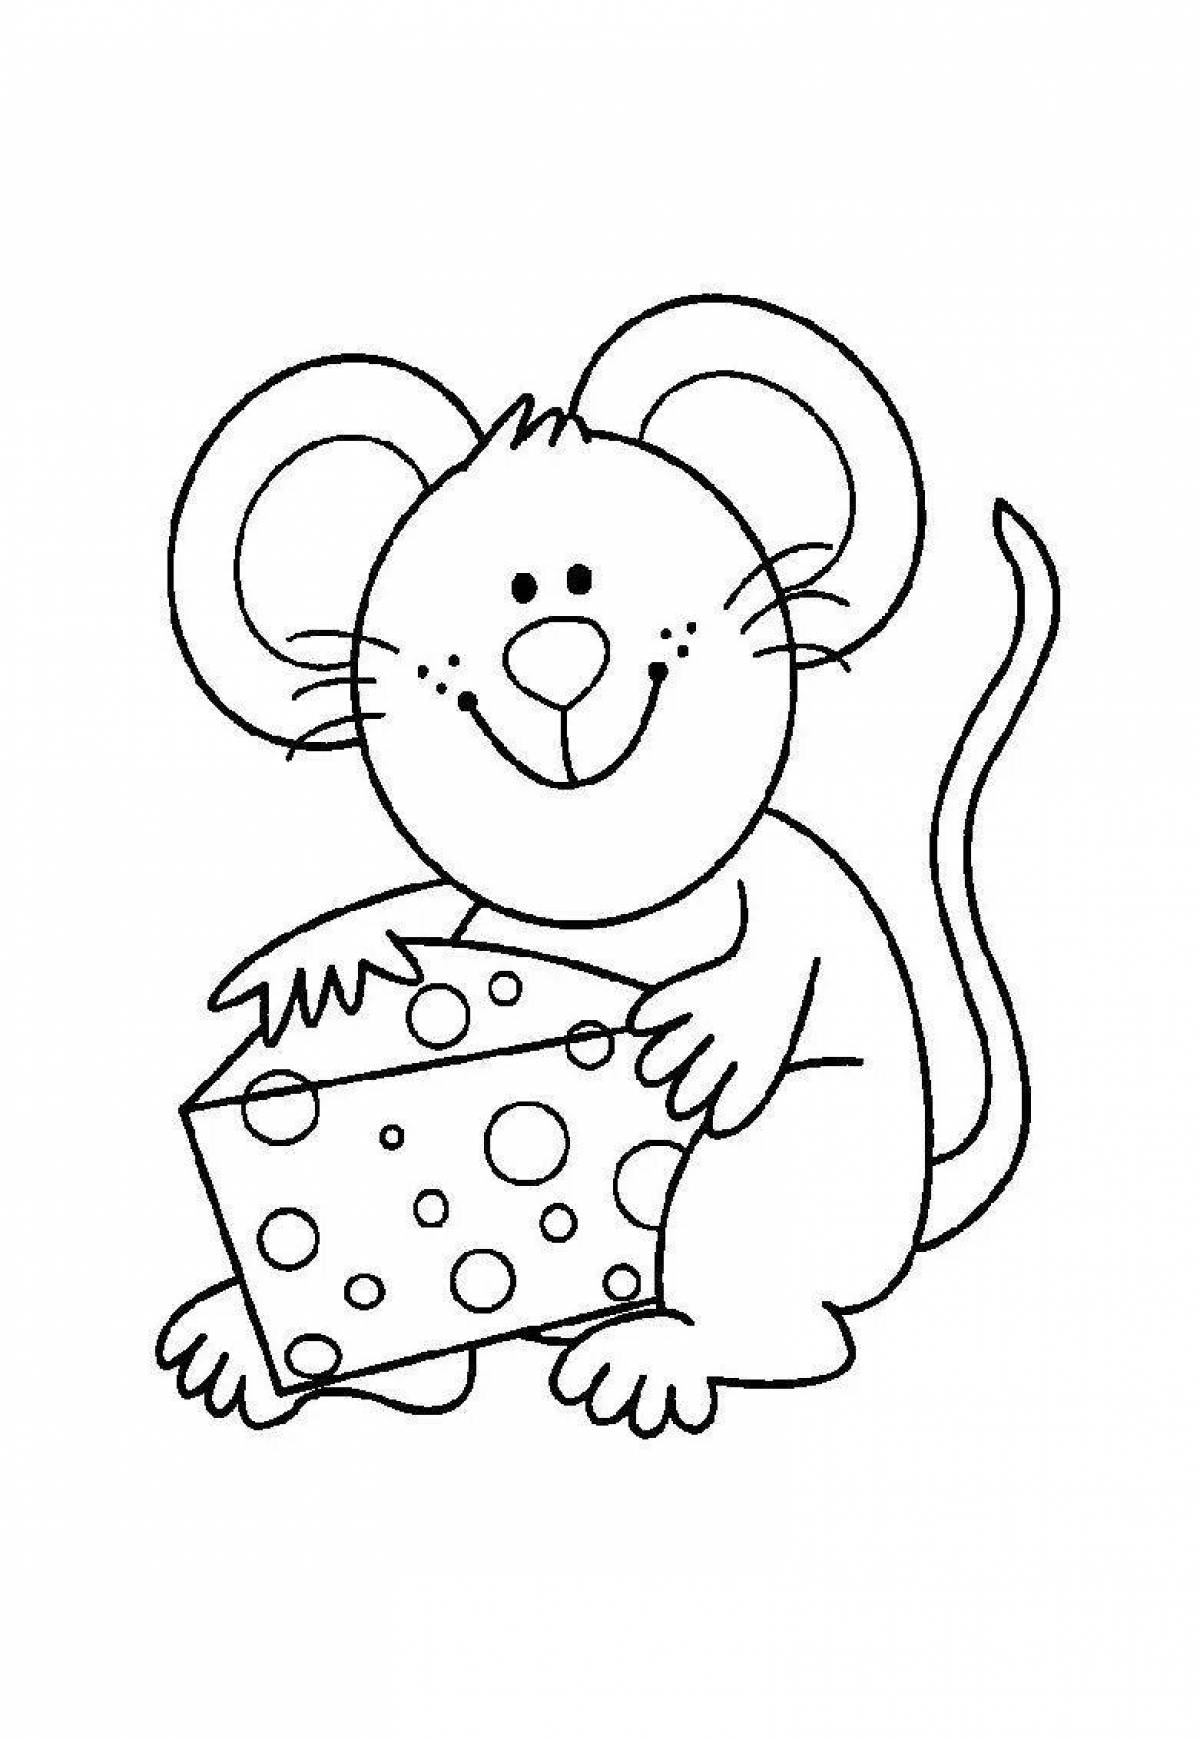 Playful mouse coloring book for 4-5 year olds